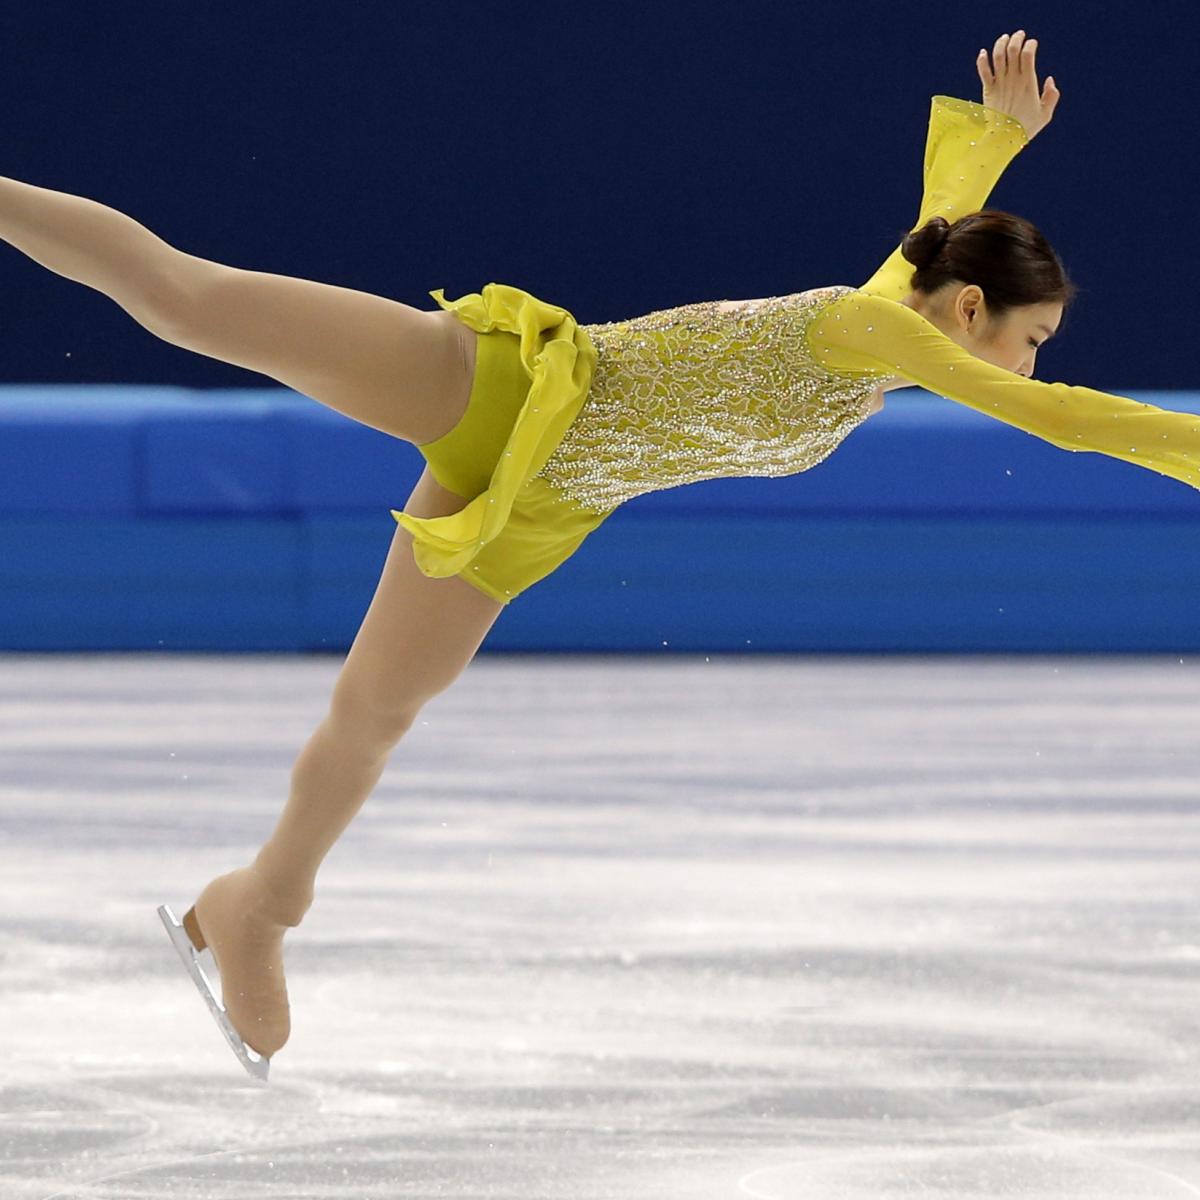 Olympic Figure Skating Schedule 2014: TV and Live Stream Info for Day